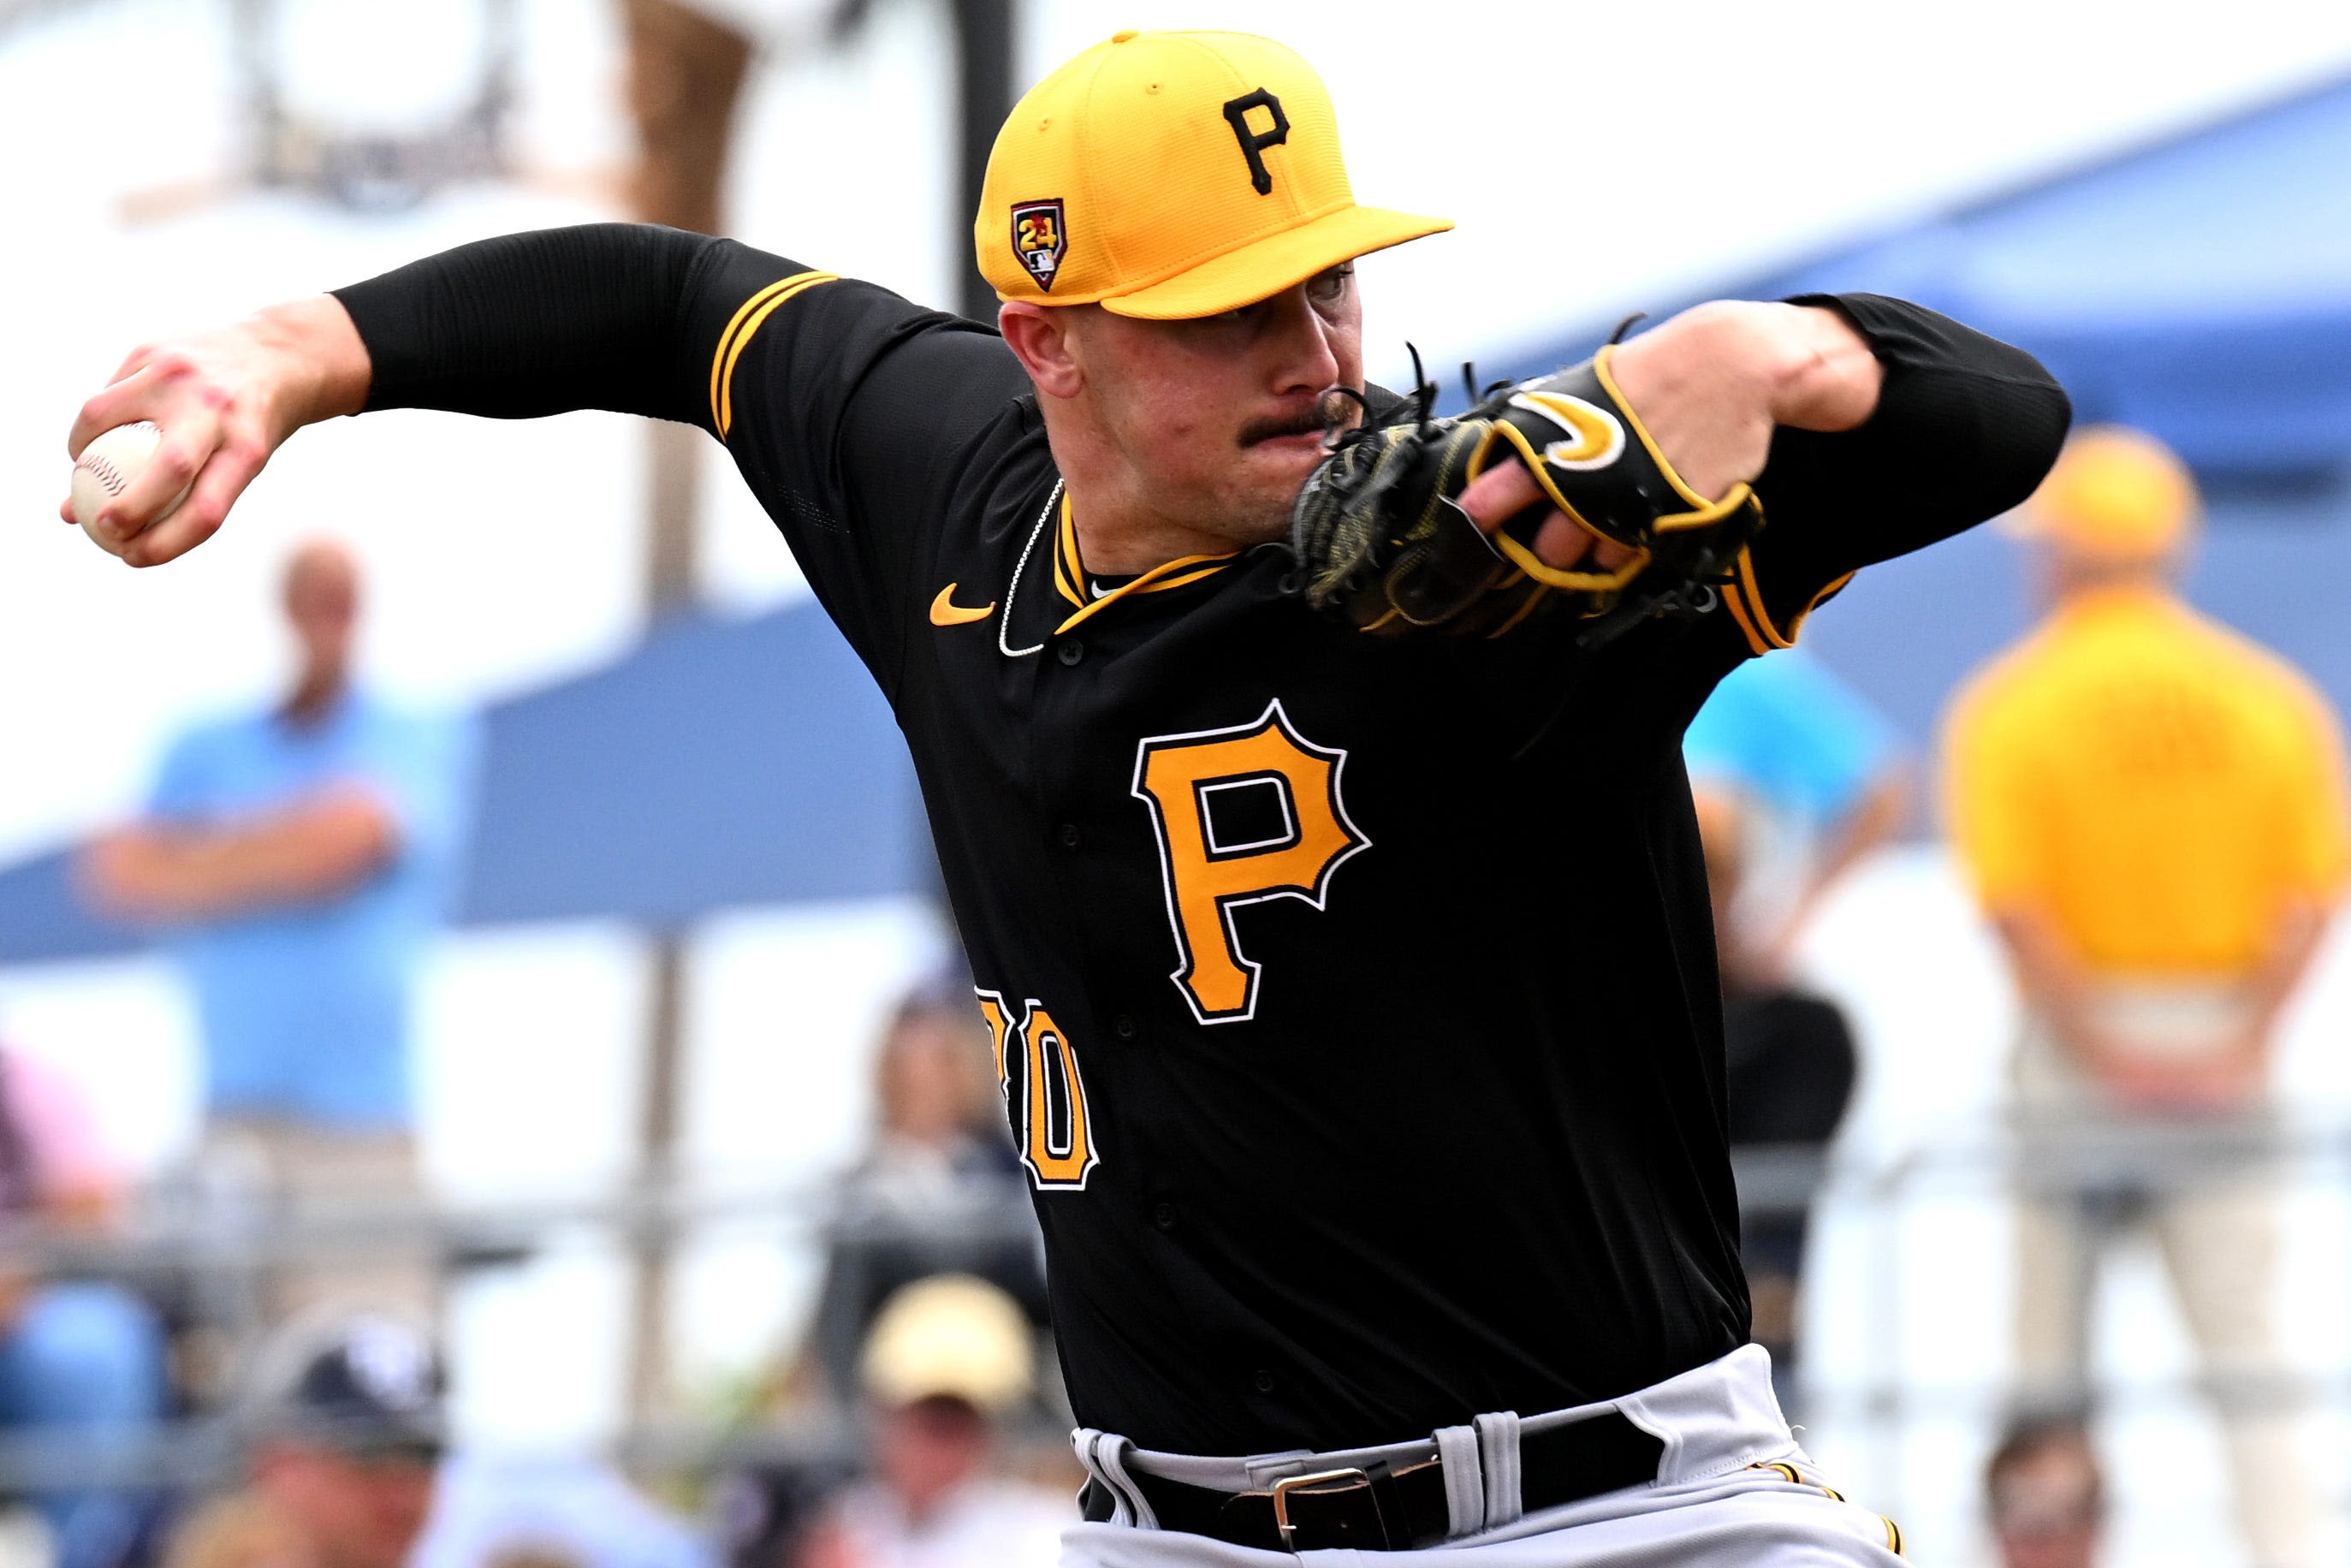 Paul Skenes, MLB's most hyped pitching prospect, makes Pirates debut Saturday in Pittsburgh